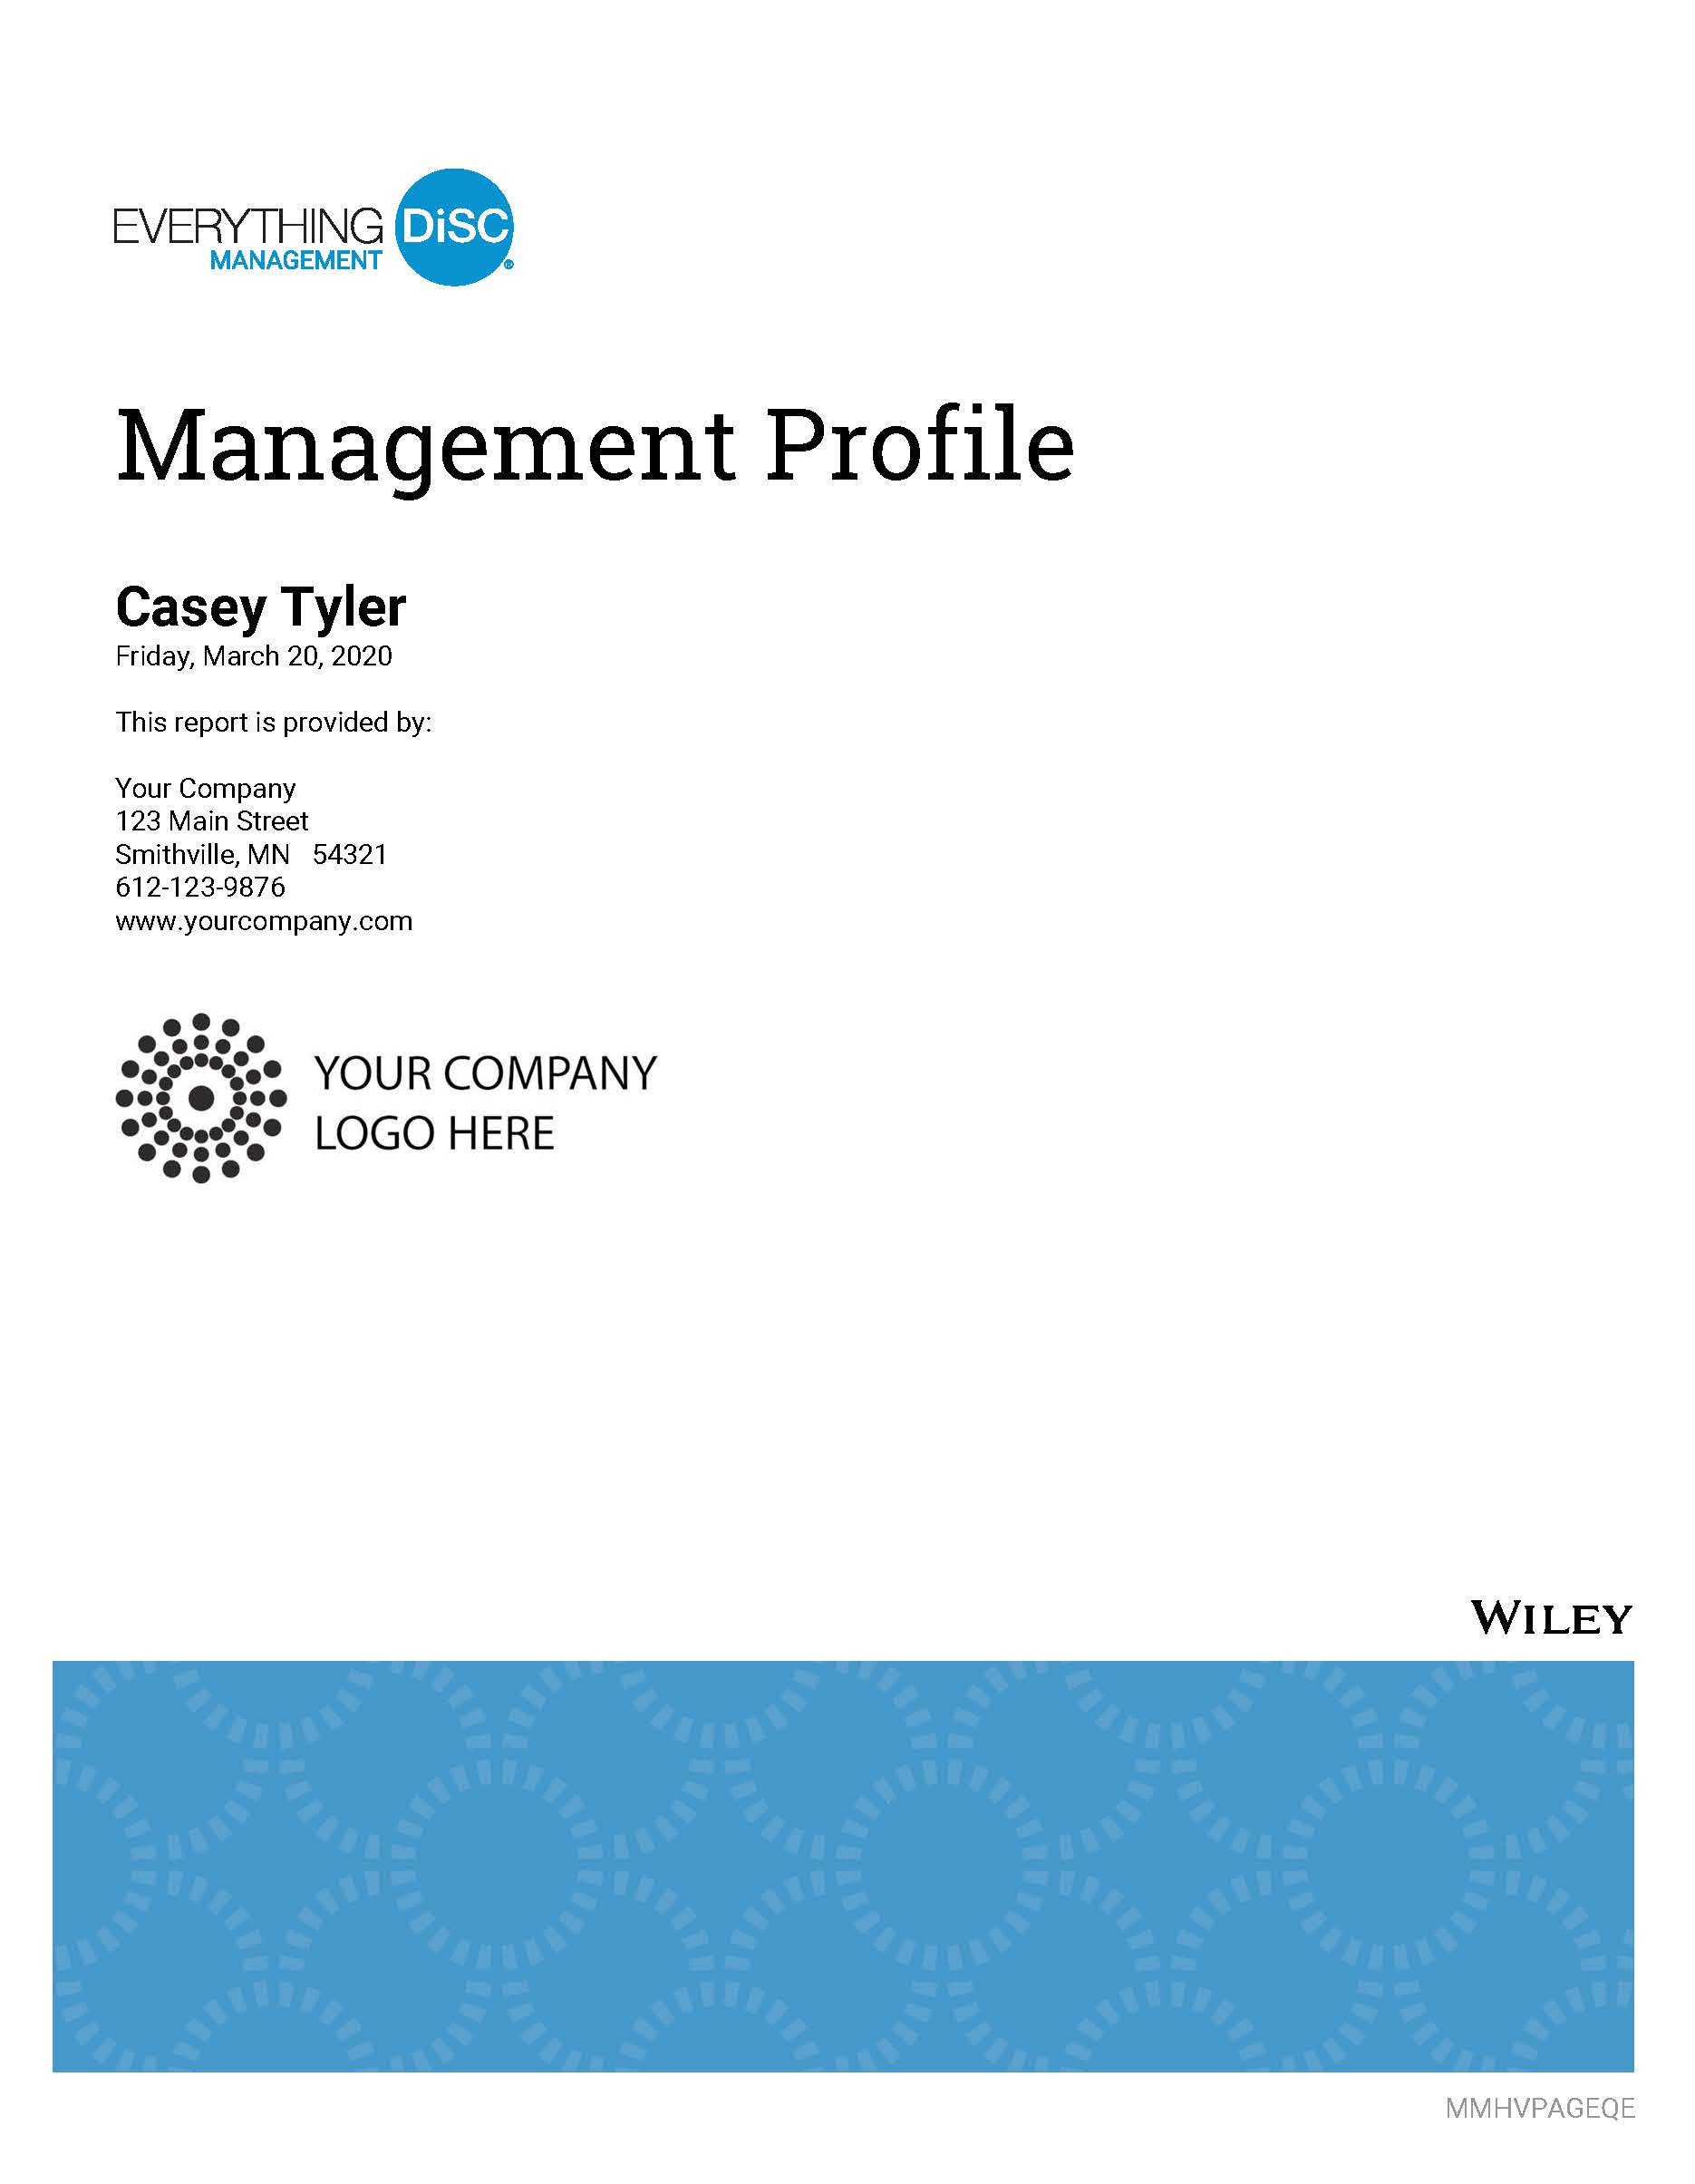 Everything DiSC Management Profile Cover Image 2020